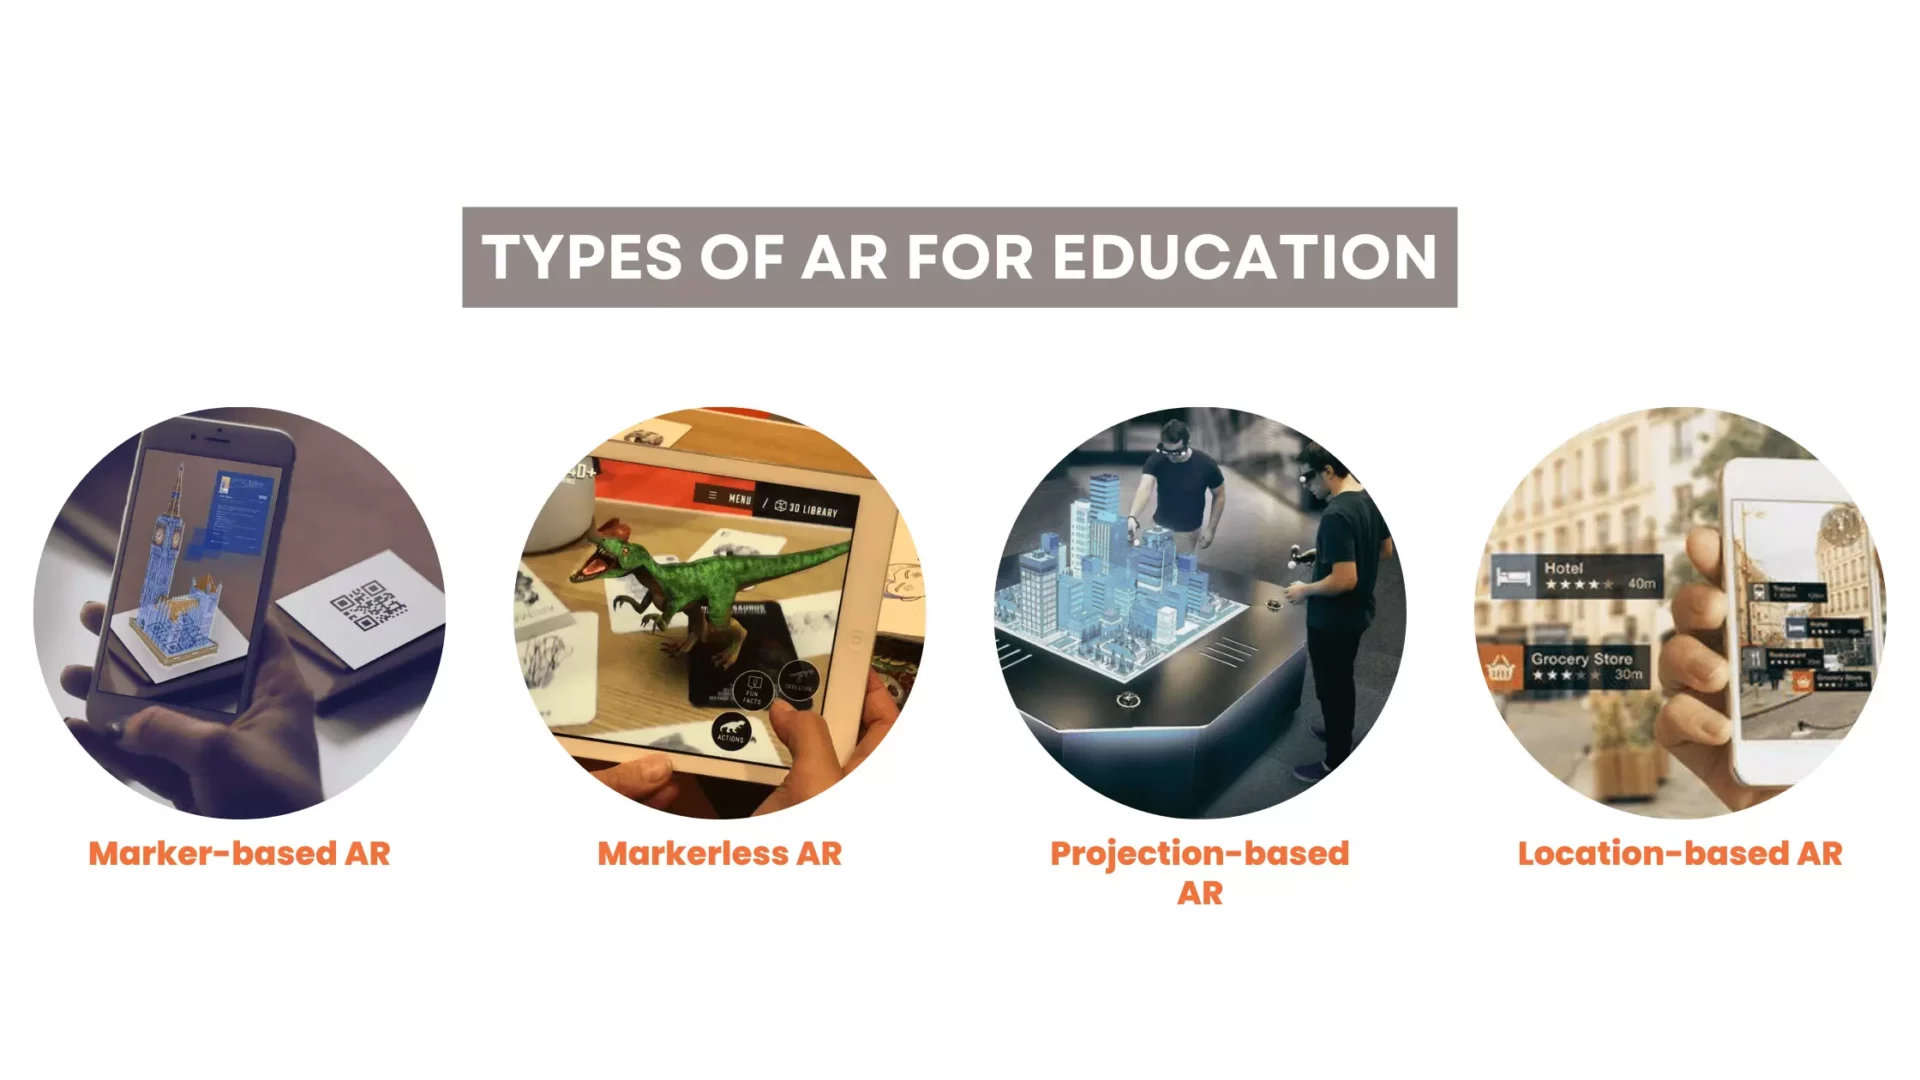 types of AR for education, Augmented Reality for Education